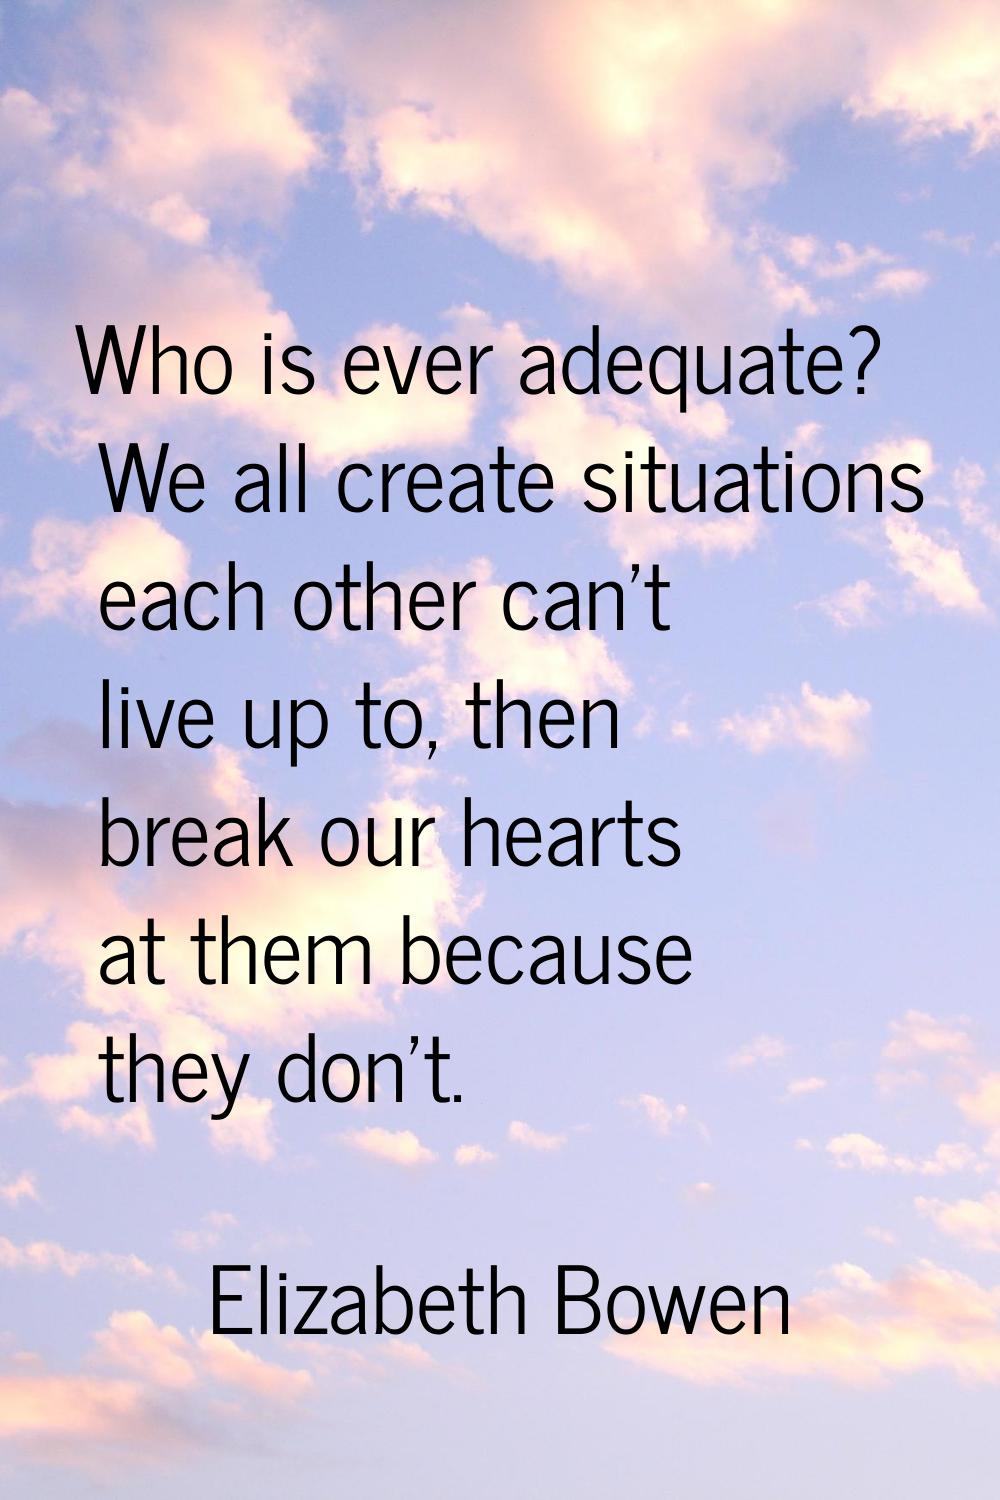 Who is ever adequate? We all create situations each other can't live up to, then break our hearts a